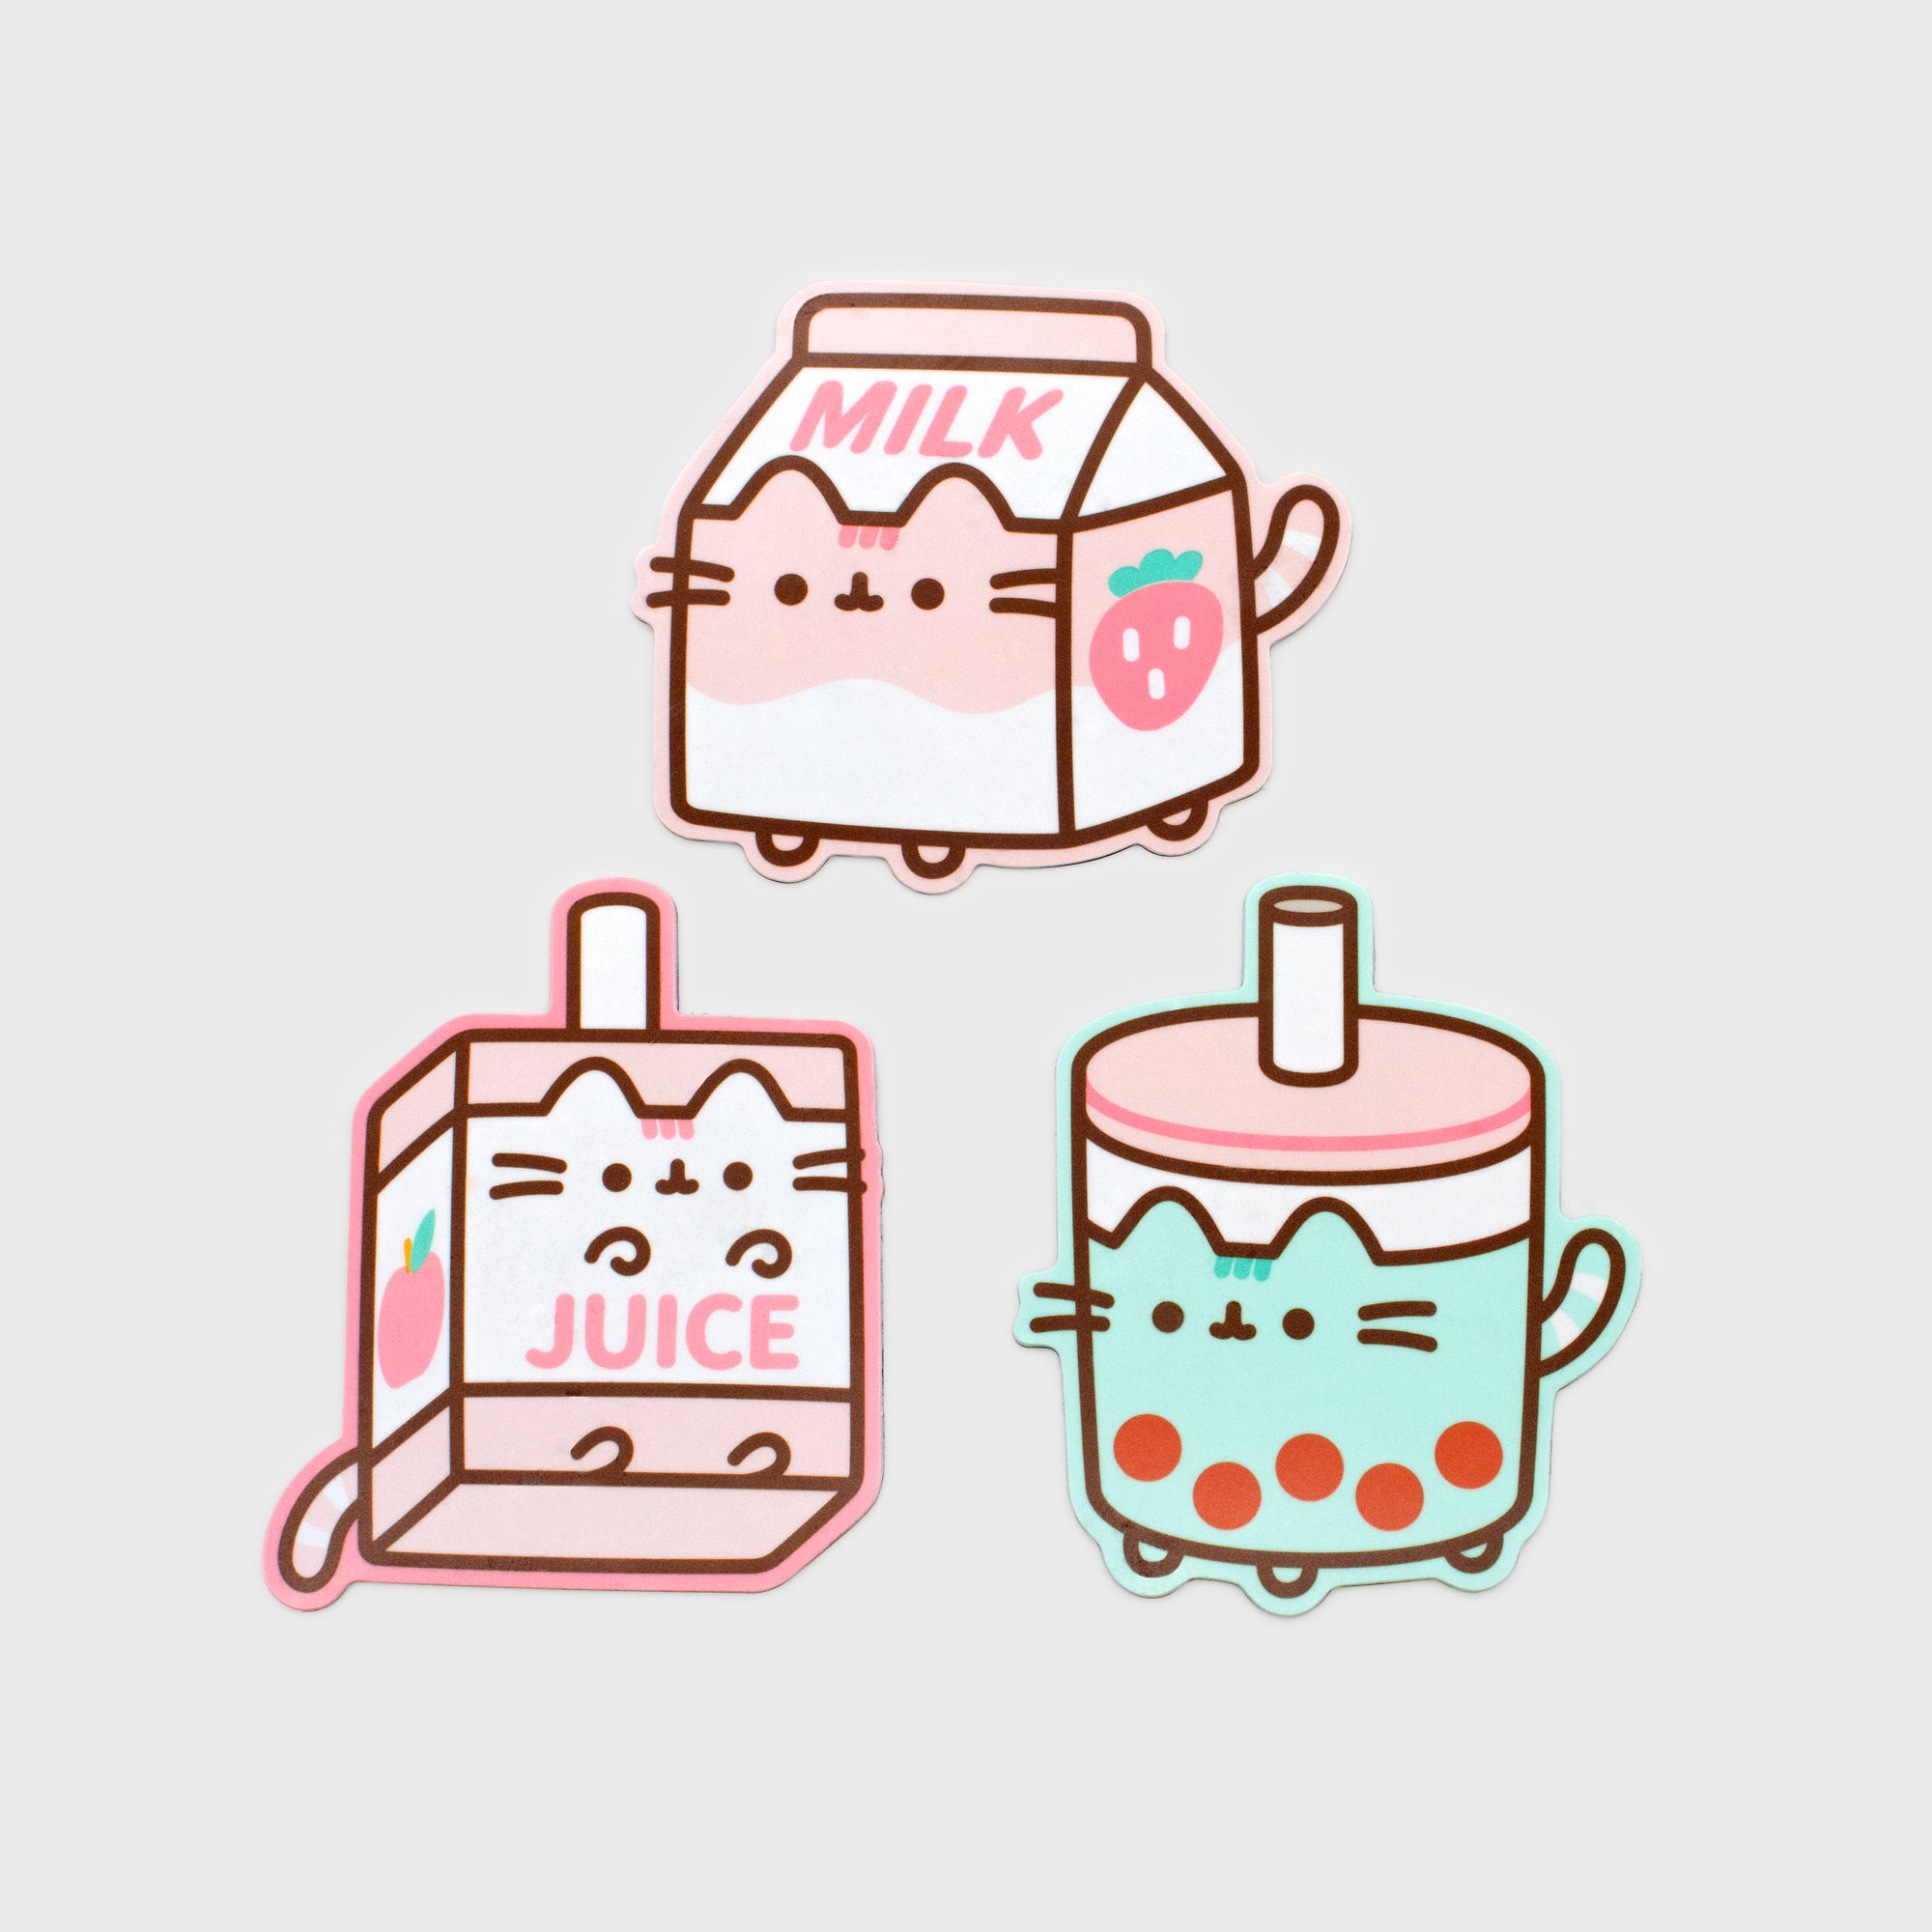 culture fly, Design, Pusheen Box Stickers